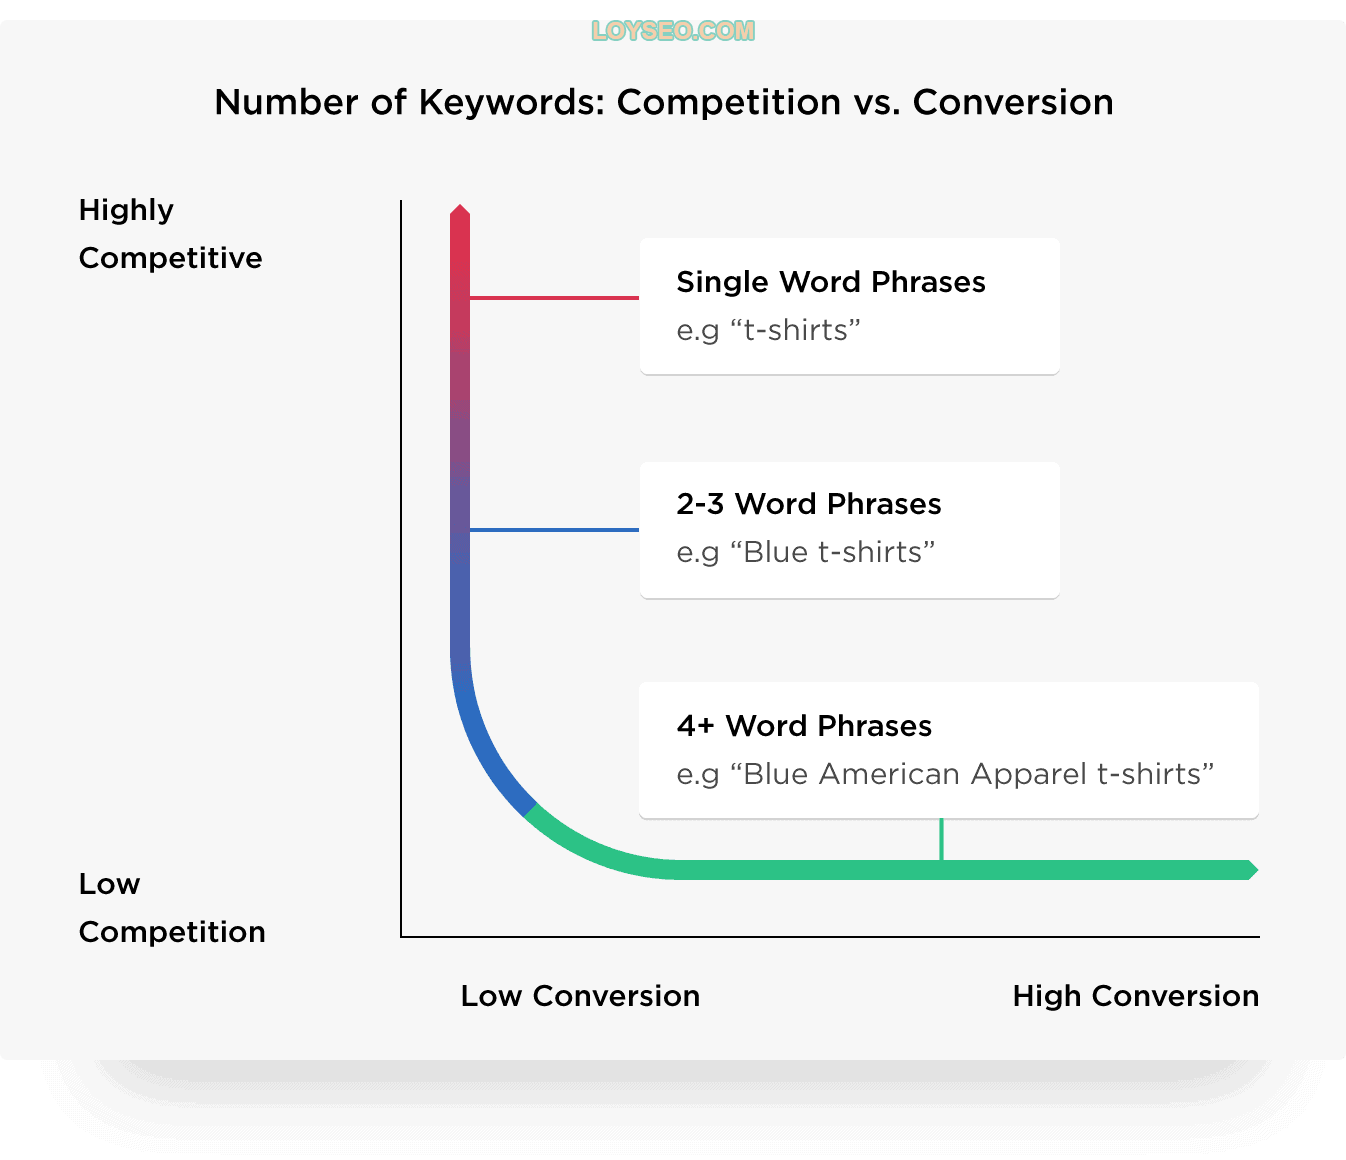 Number of keywords: Competition .vs. Conversion